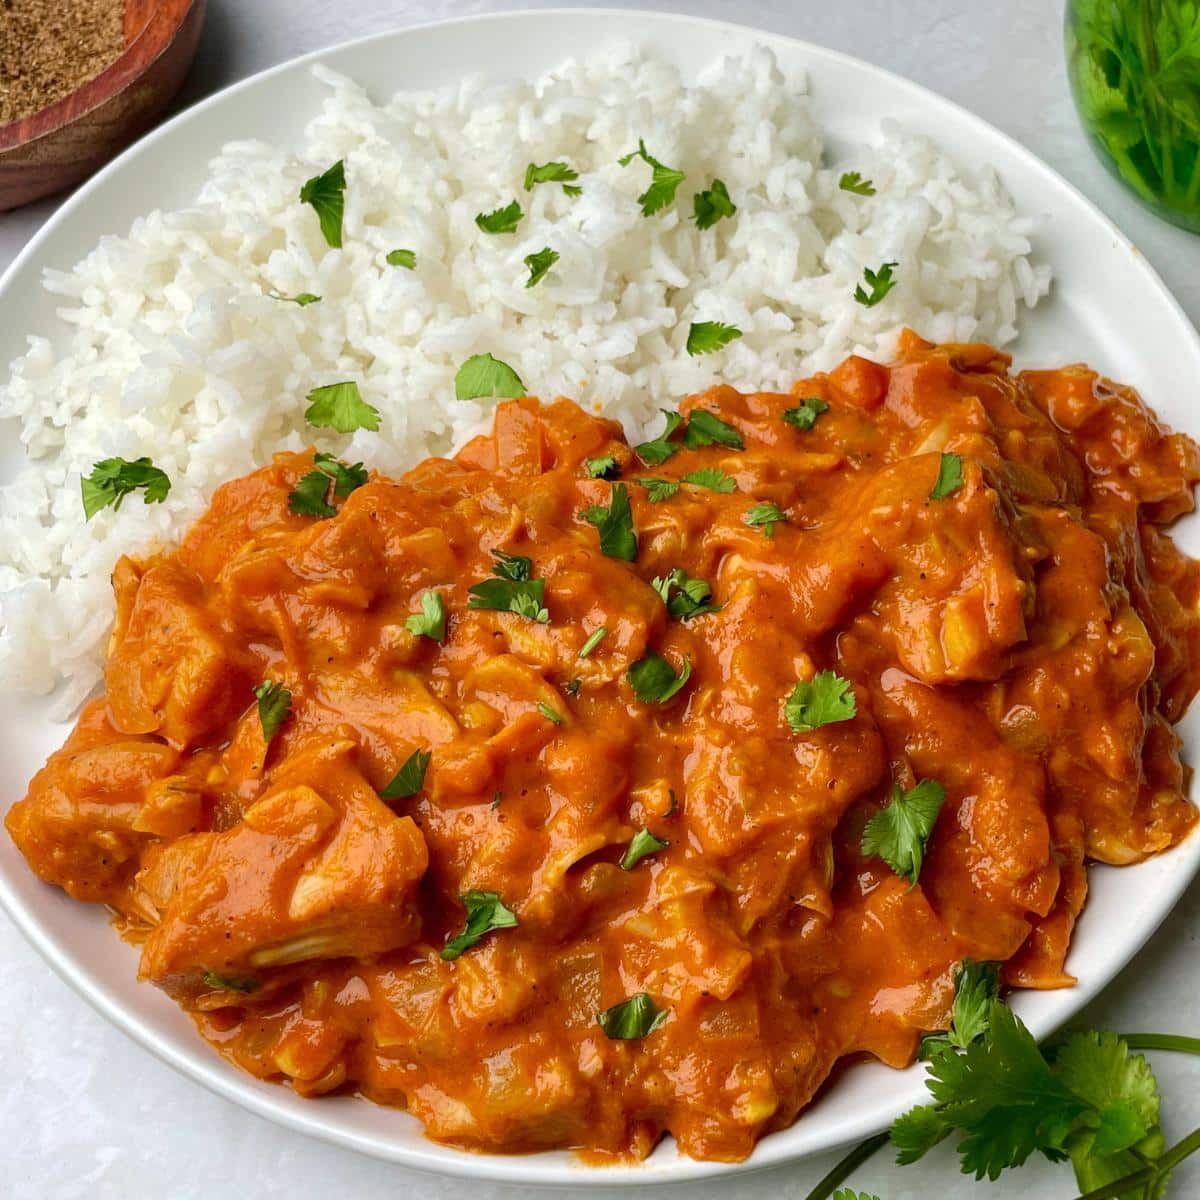 A plate with vegan tikka masala and a side of rice.